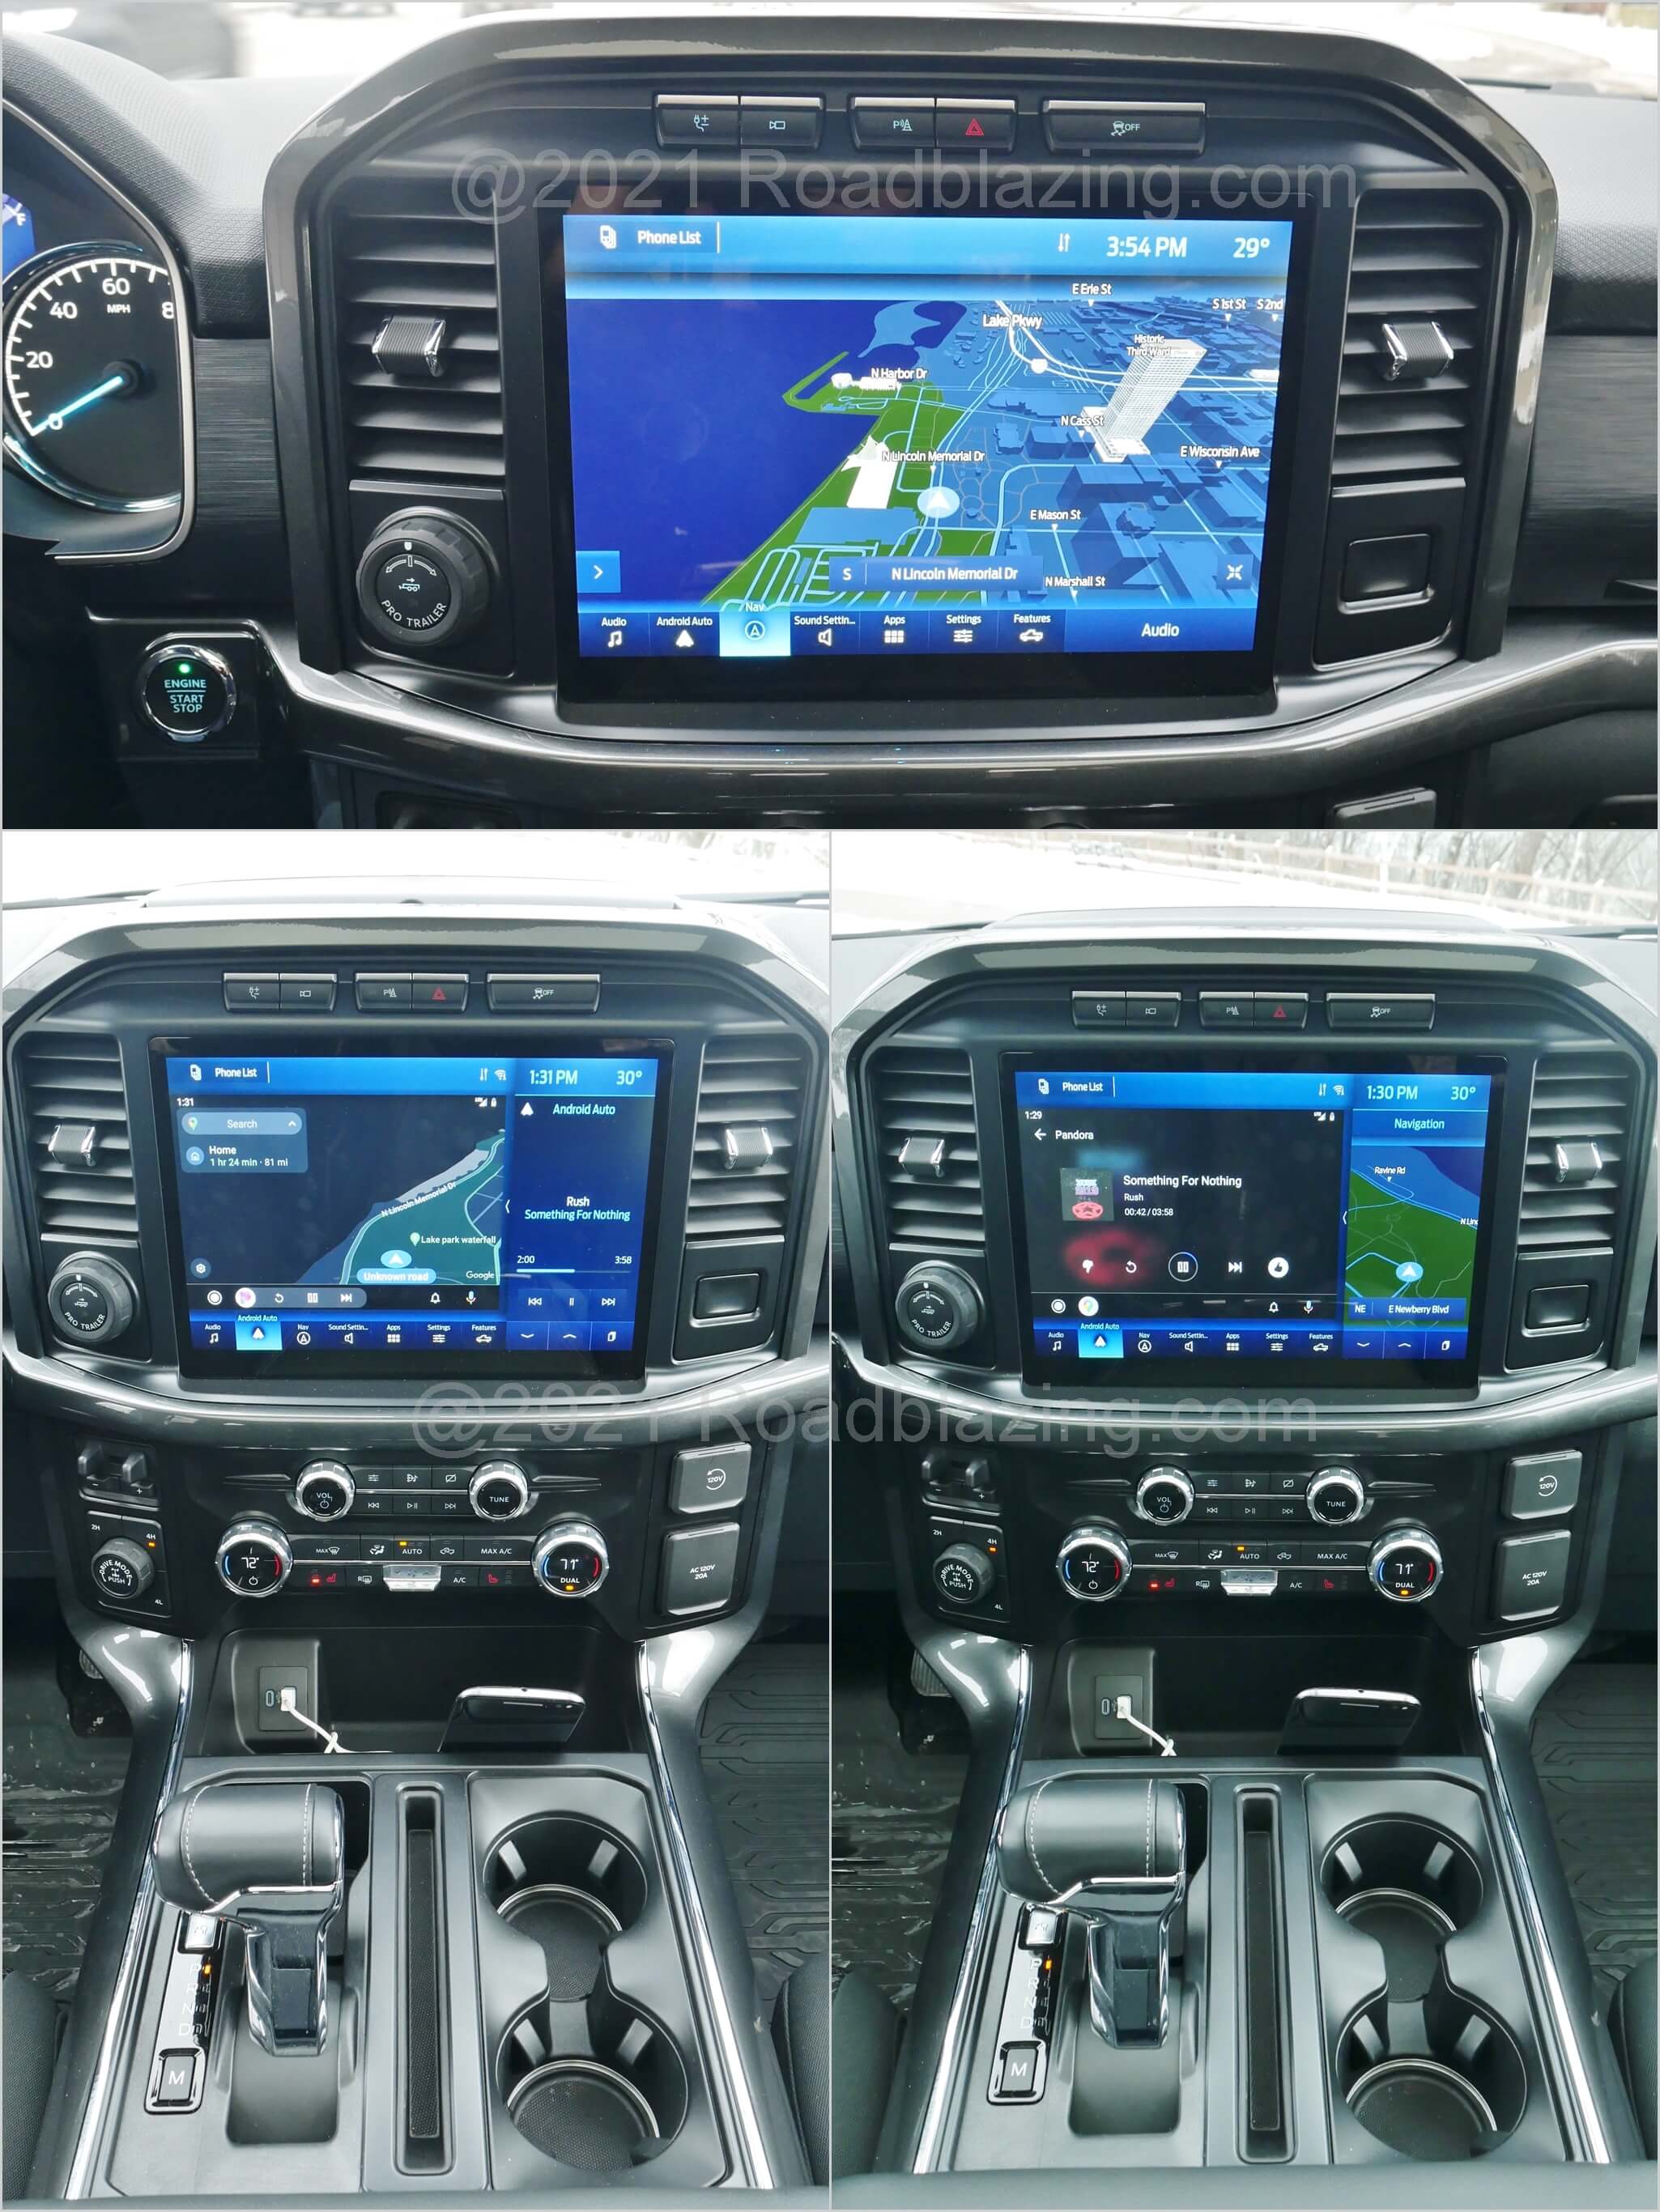 2021 Ford F-150 Supercrew XLT 4x4 PowerBoost hybrid: native navigation vs. Android's Google Maps